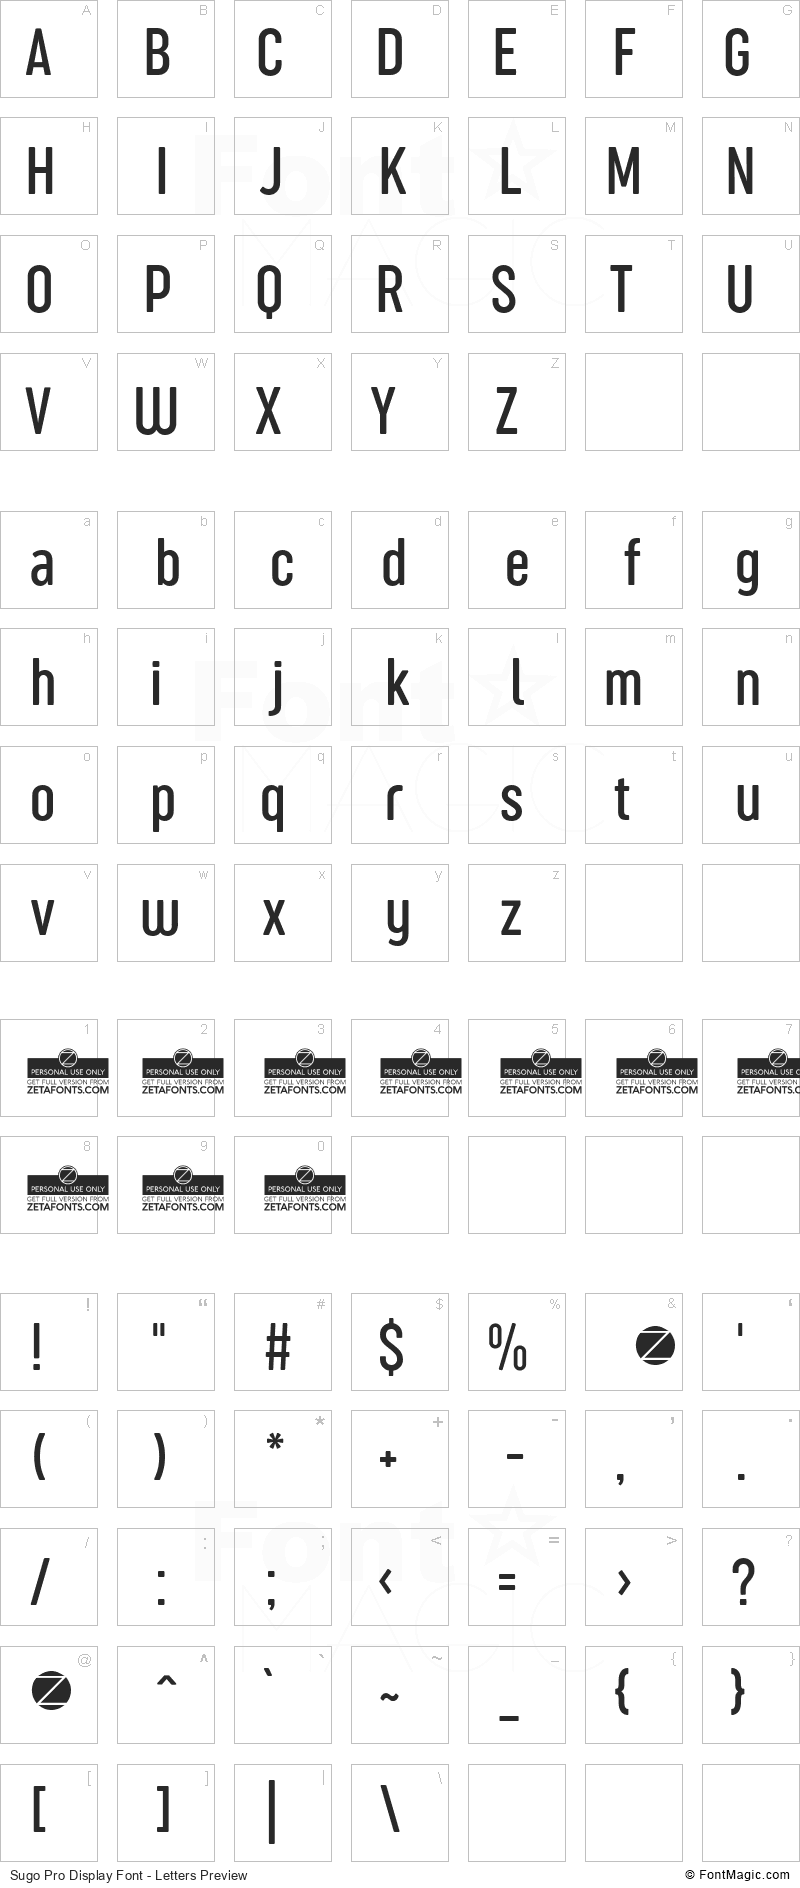 Sugo Pro Display Font - All Latters Preview Chart